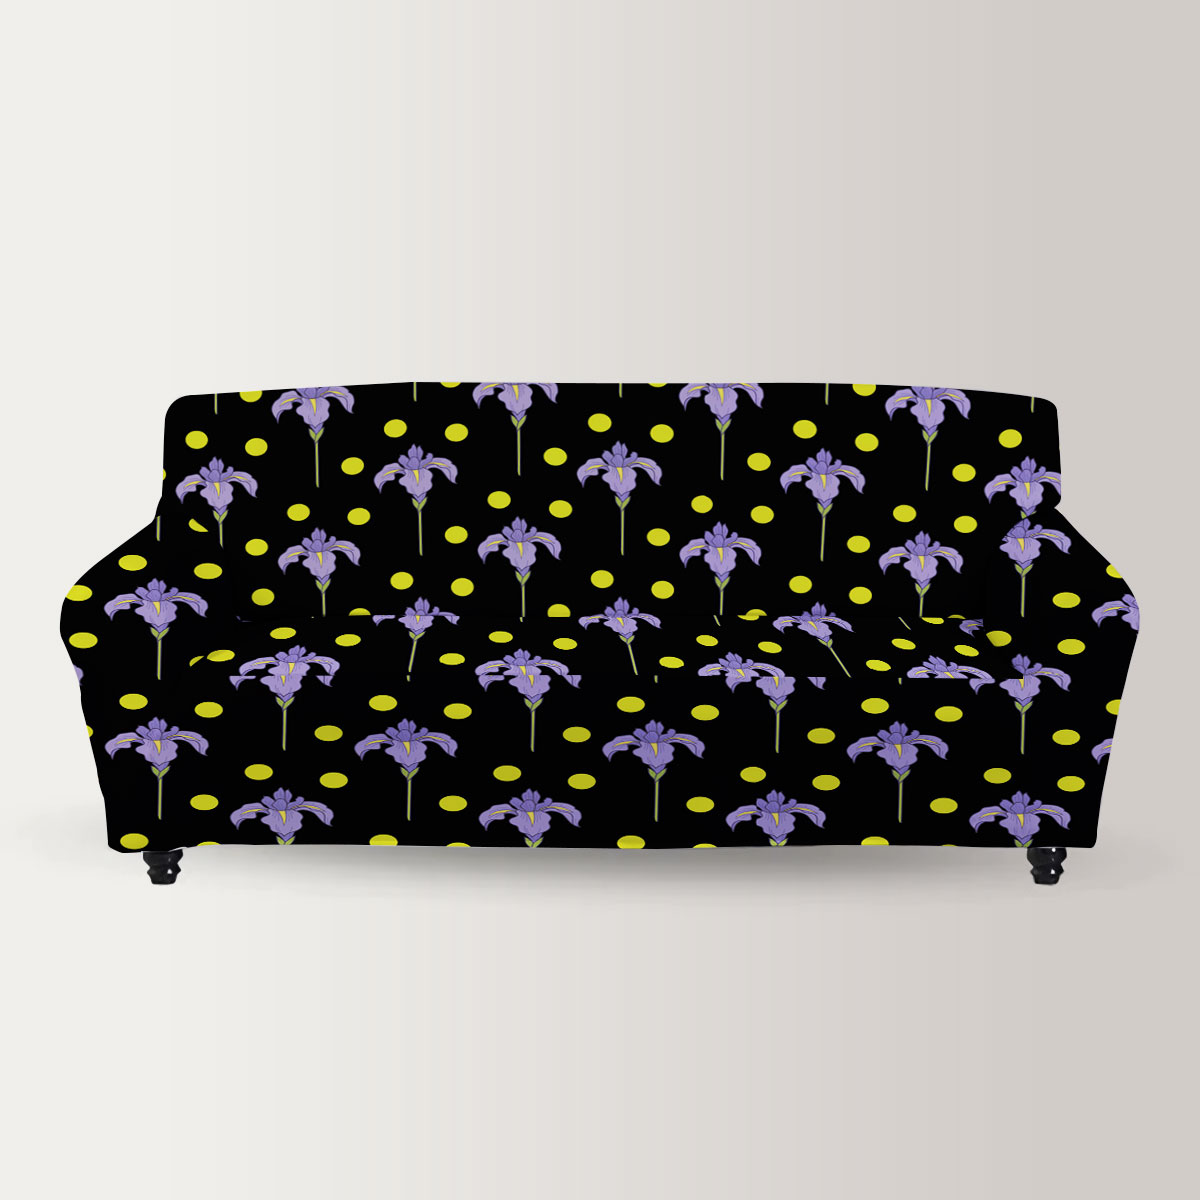 Iris Flower And Dot Seamless Pattern Sofa Cover